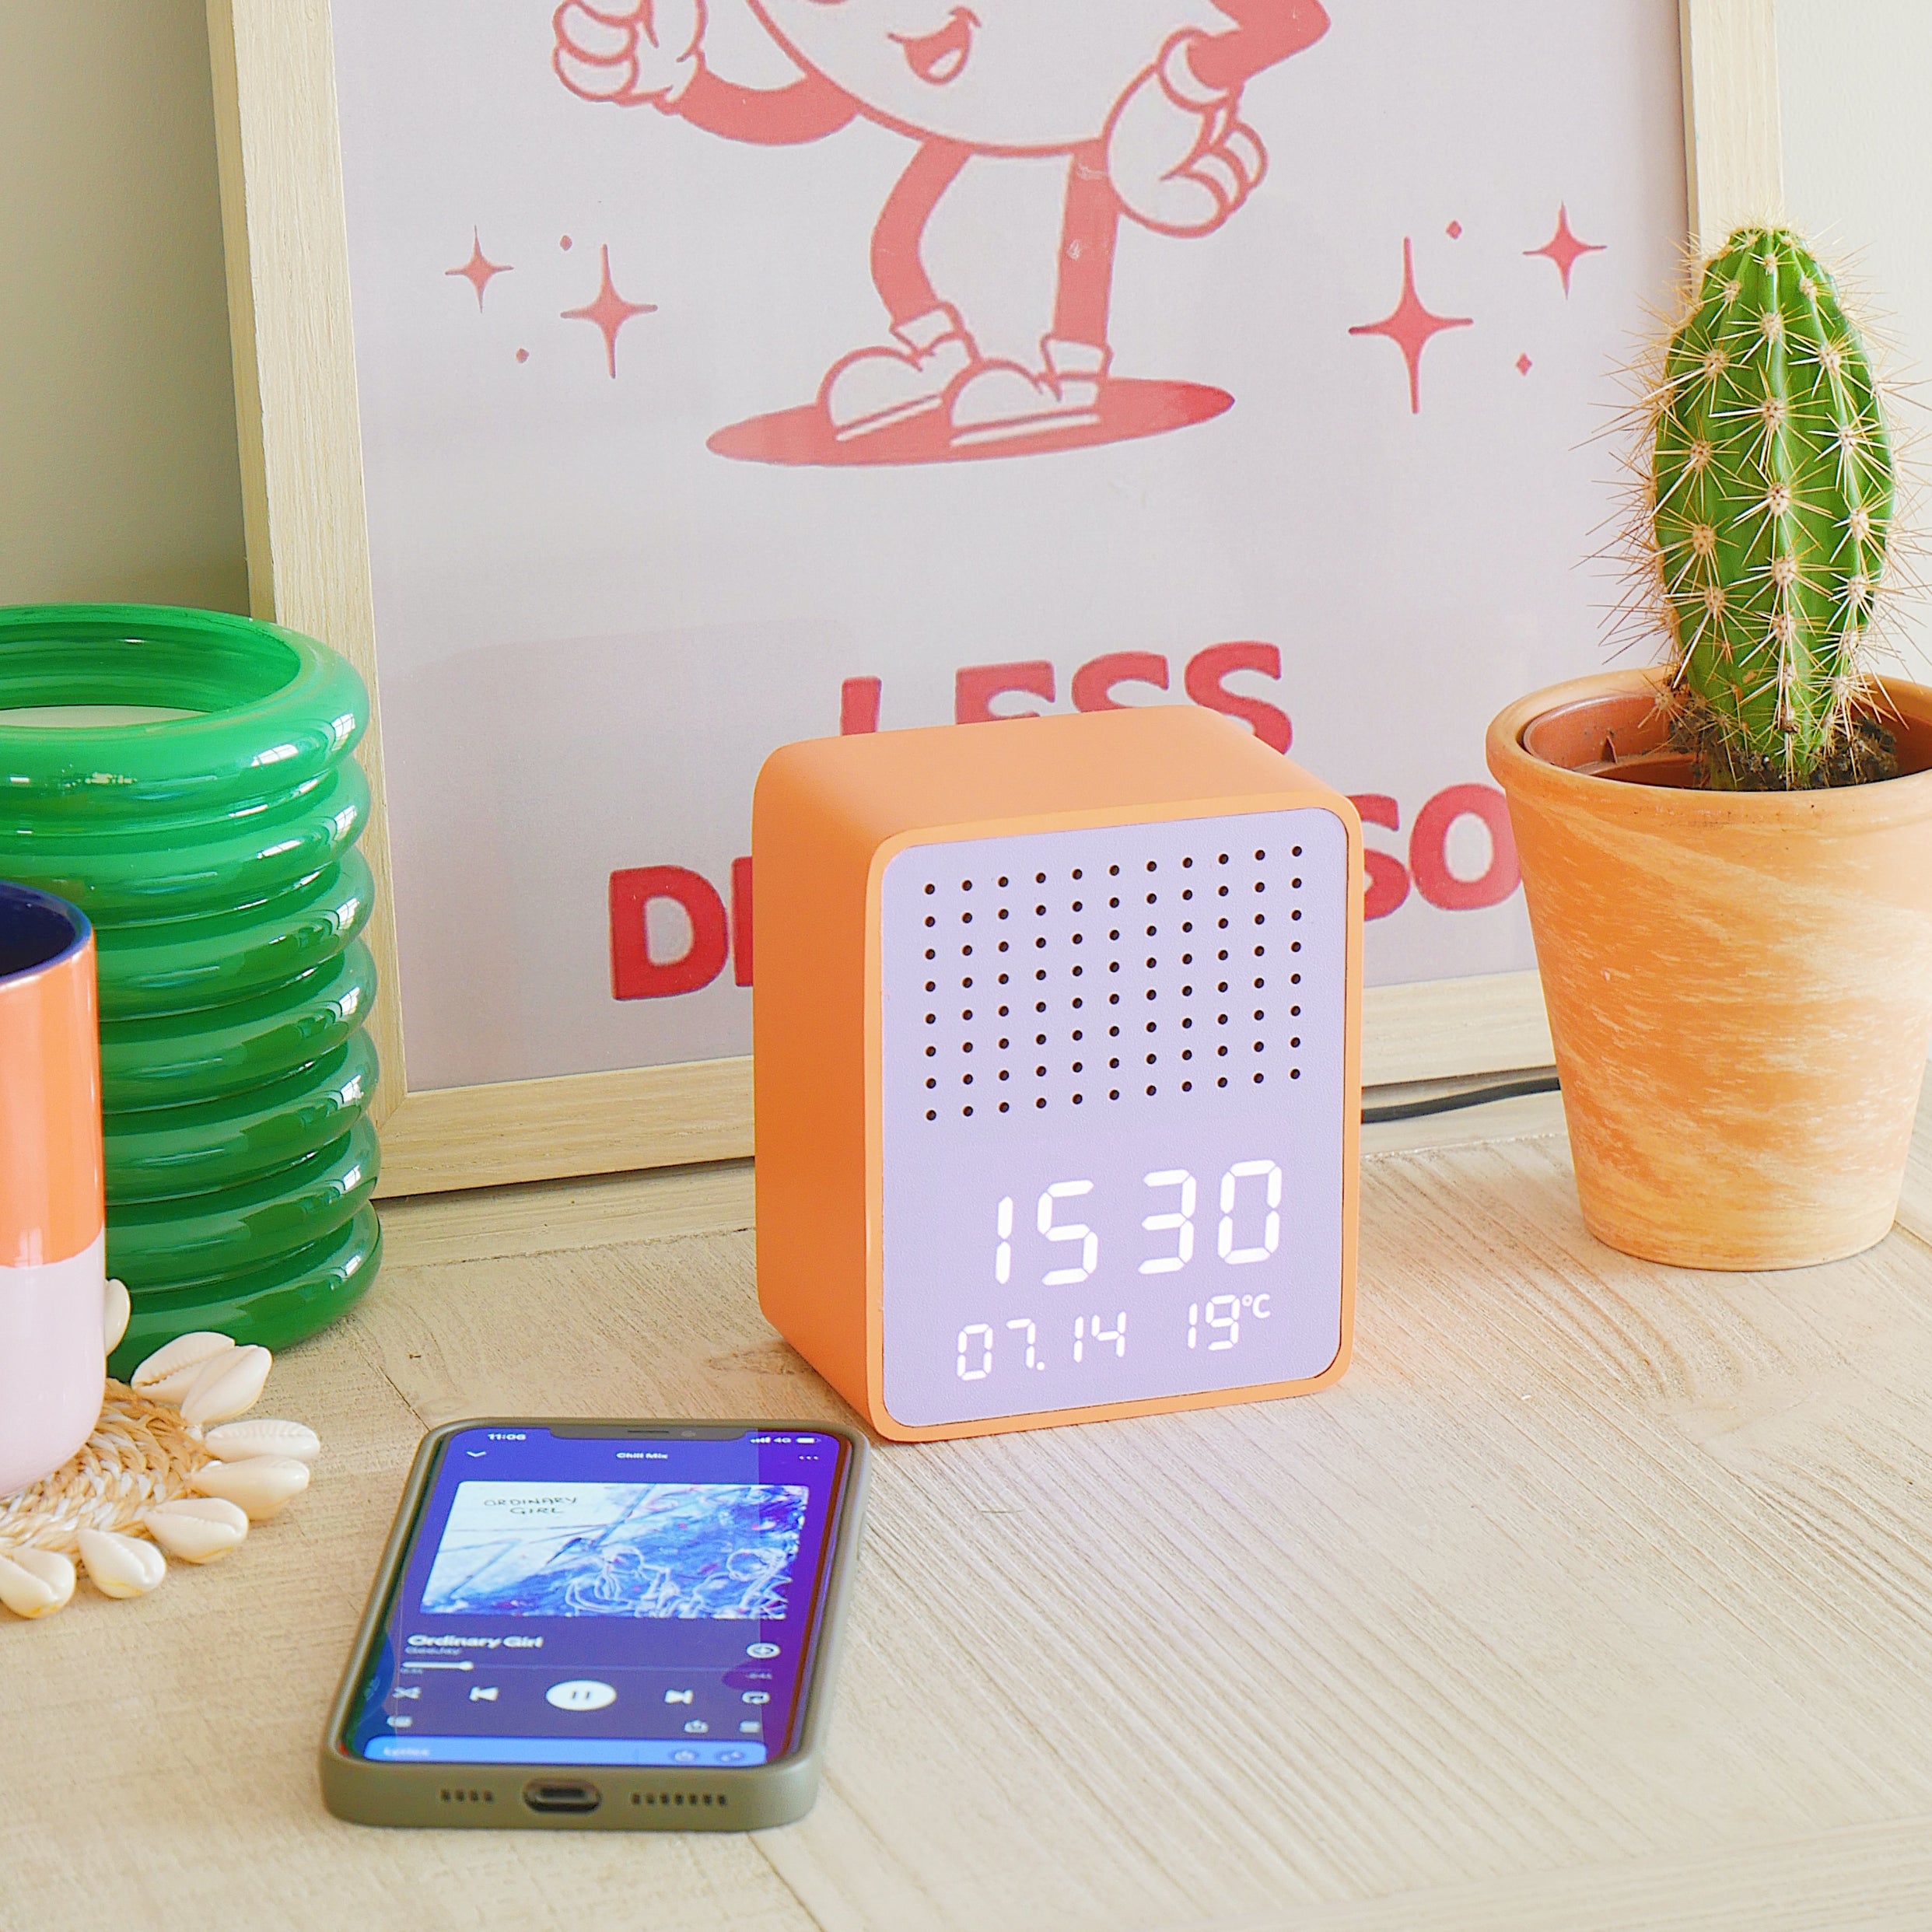 Wireless Charger and Bluetooth Speaker Rise Play - Orange